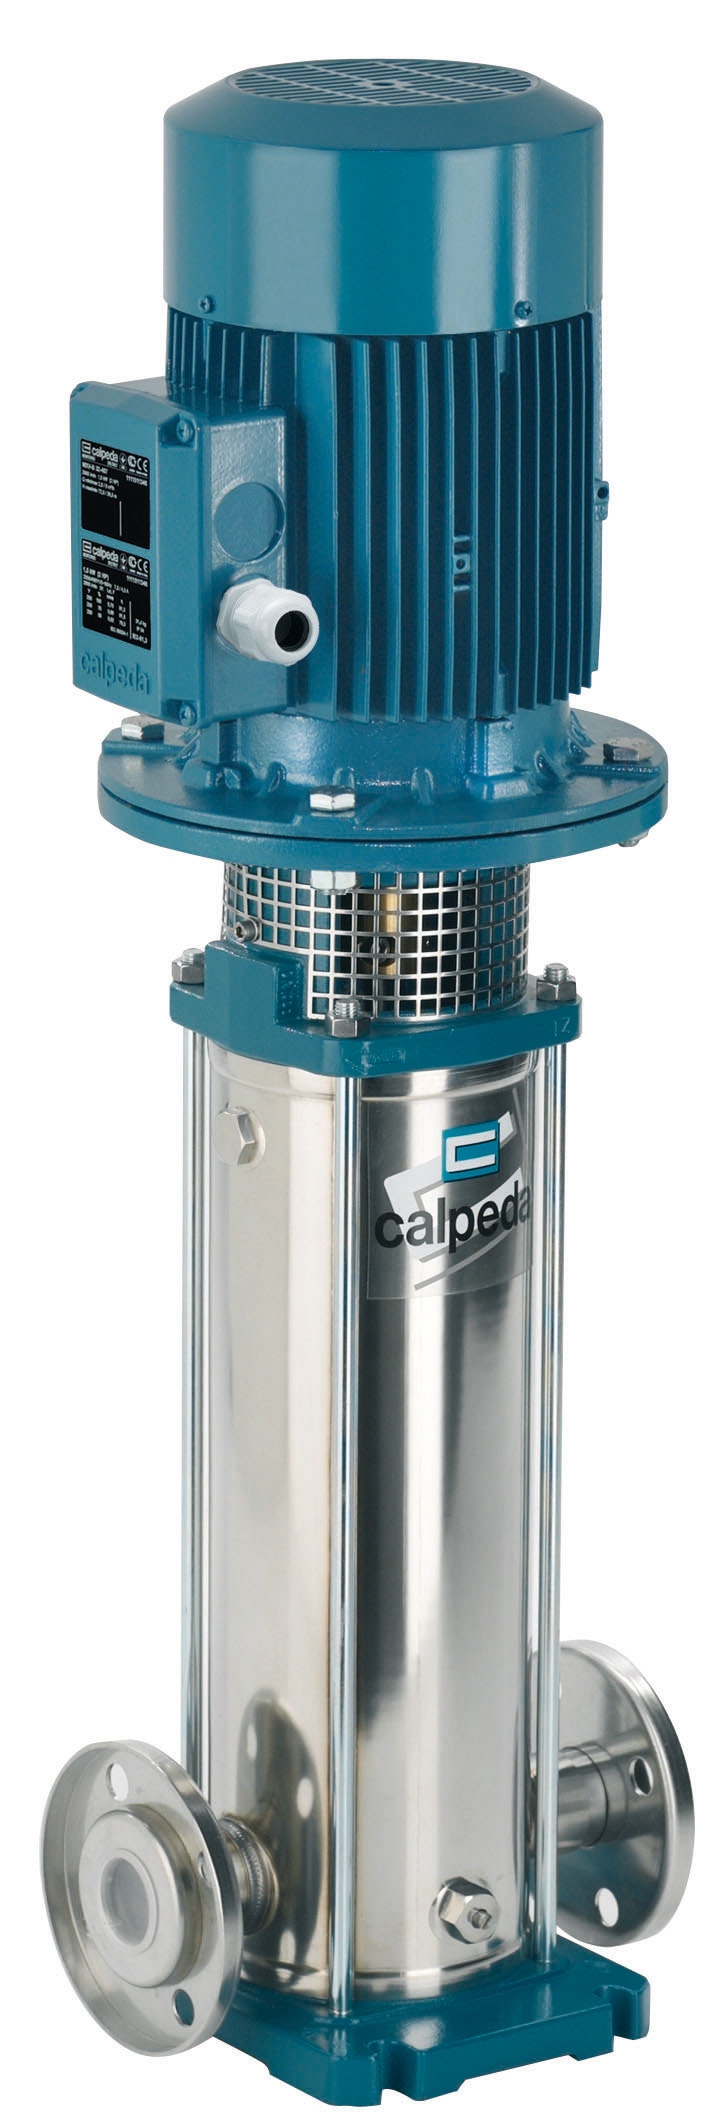 Calpeda MXVL Vertical Multistage Pumps (3 Phase)